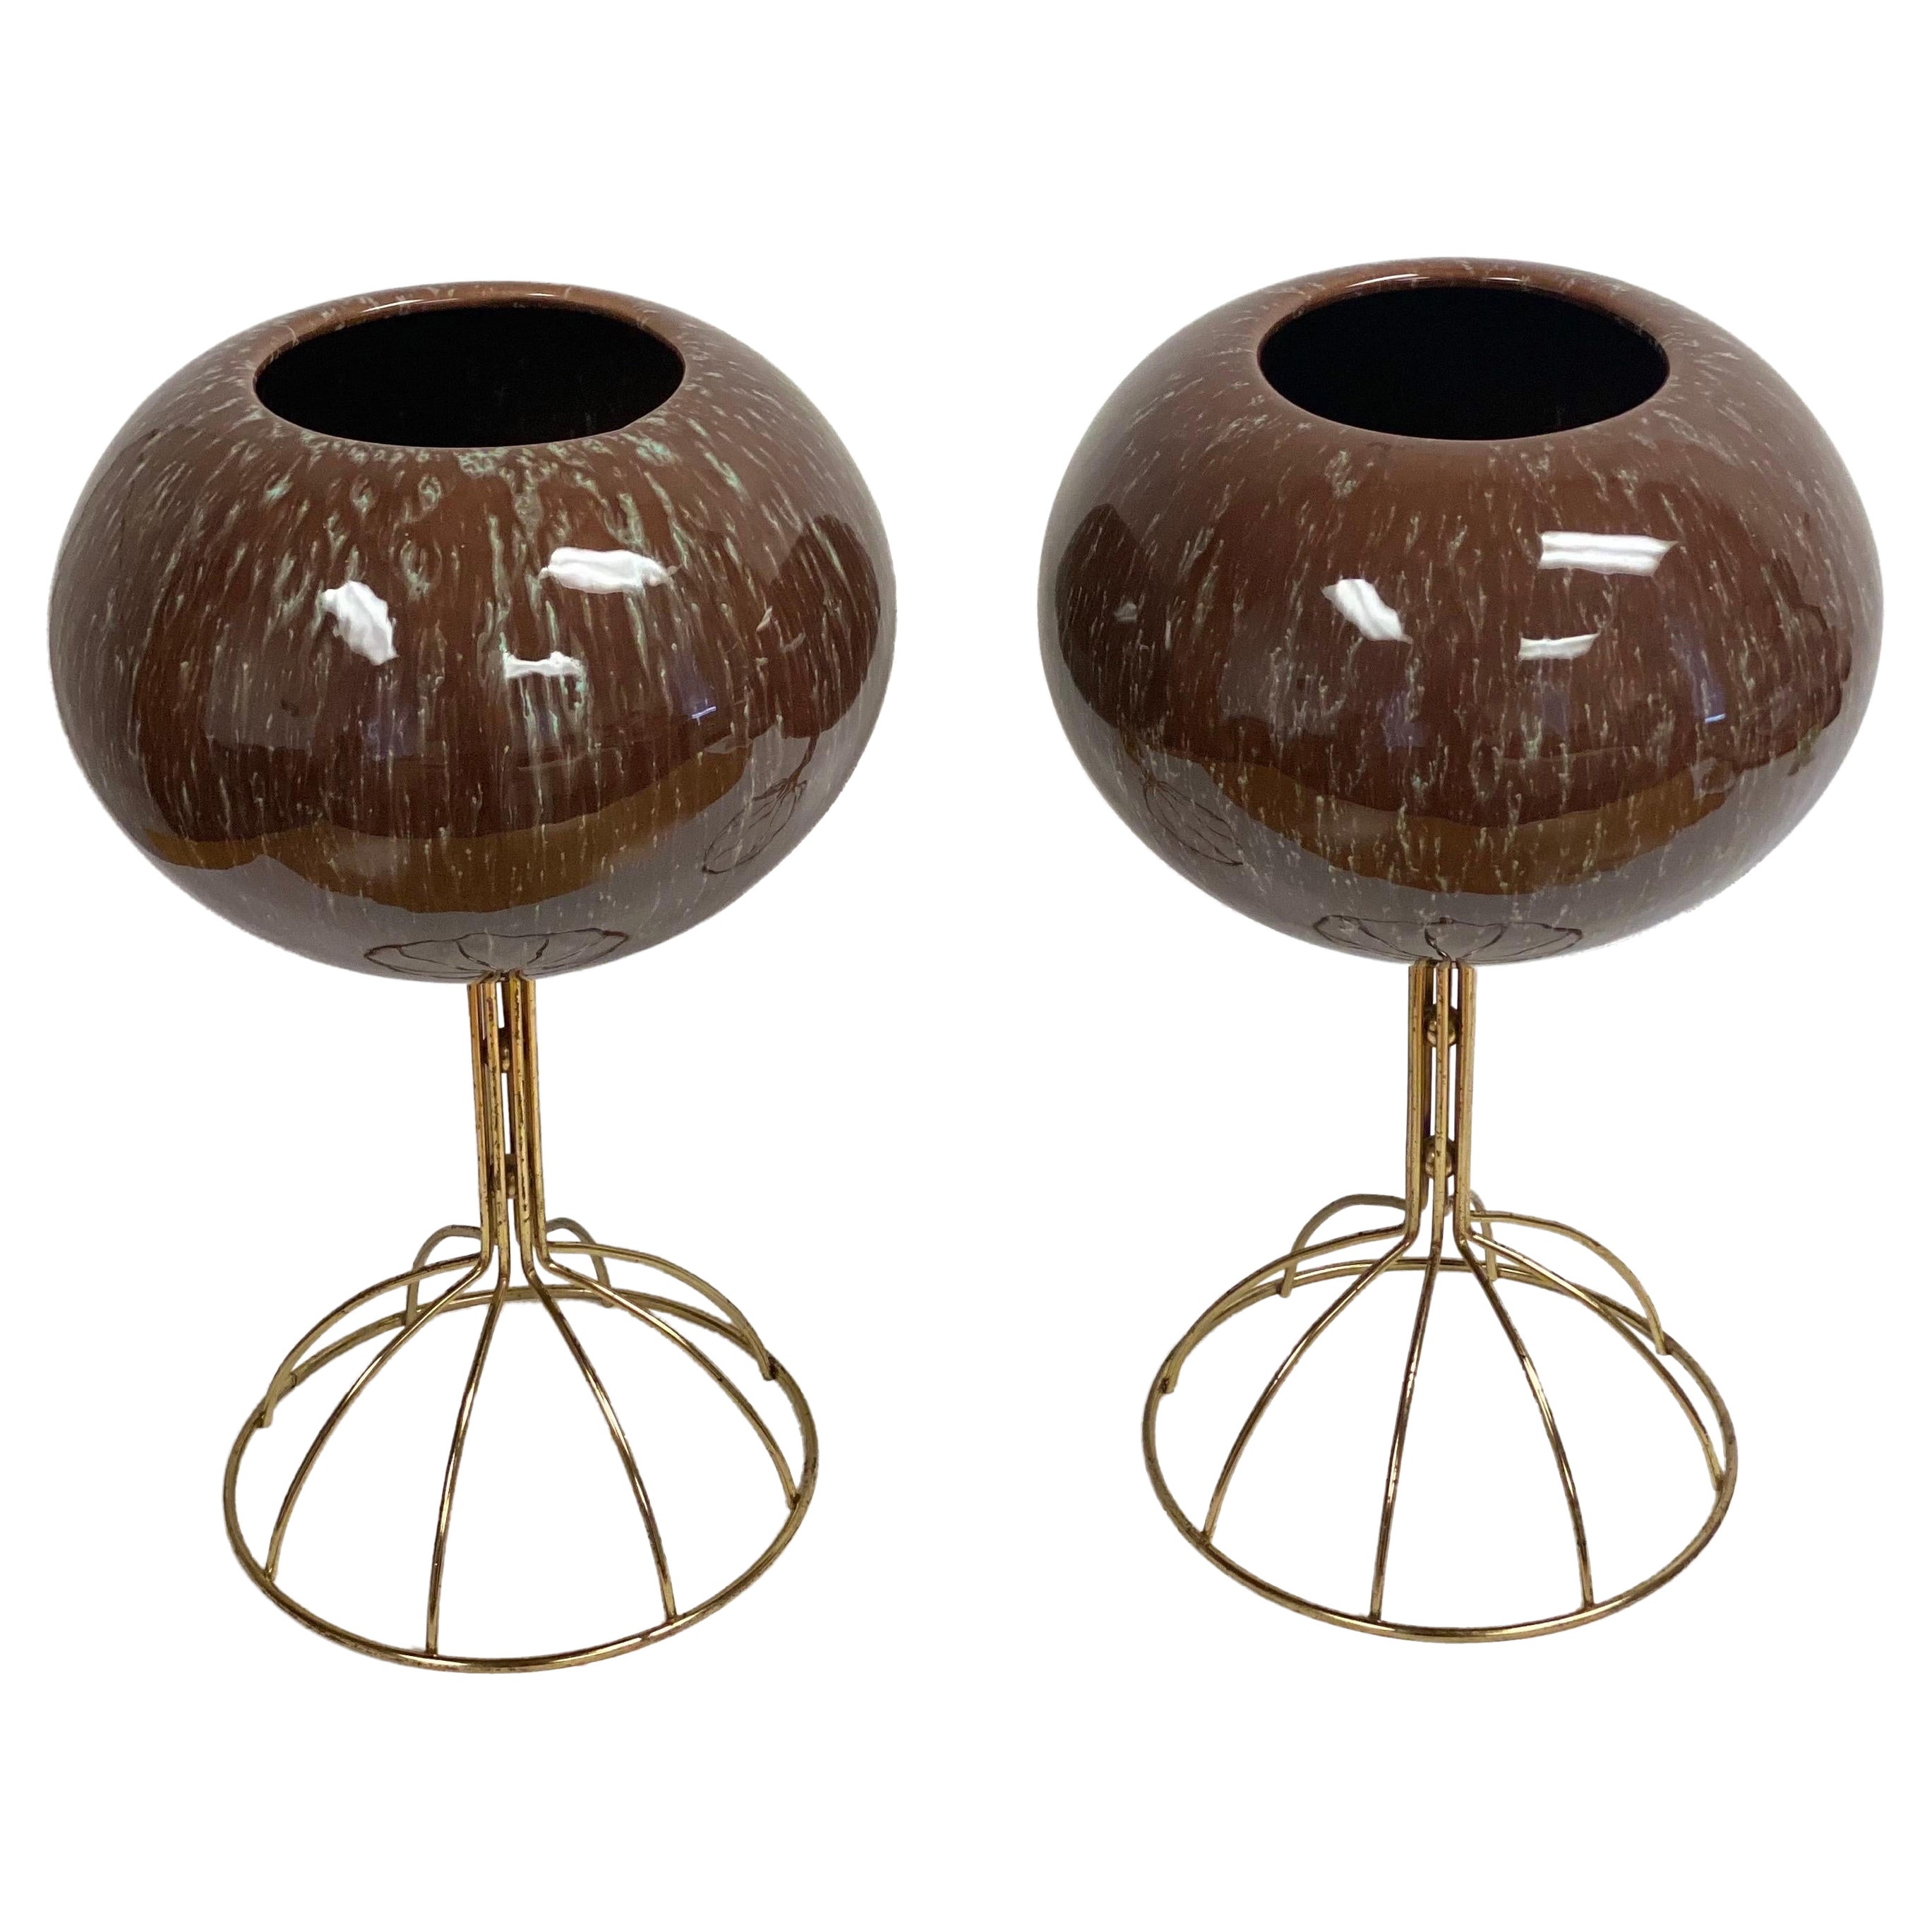 Vintage Italian Brown Ceramic Sphere Planters with Brass Stands, a Pair For Sale